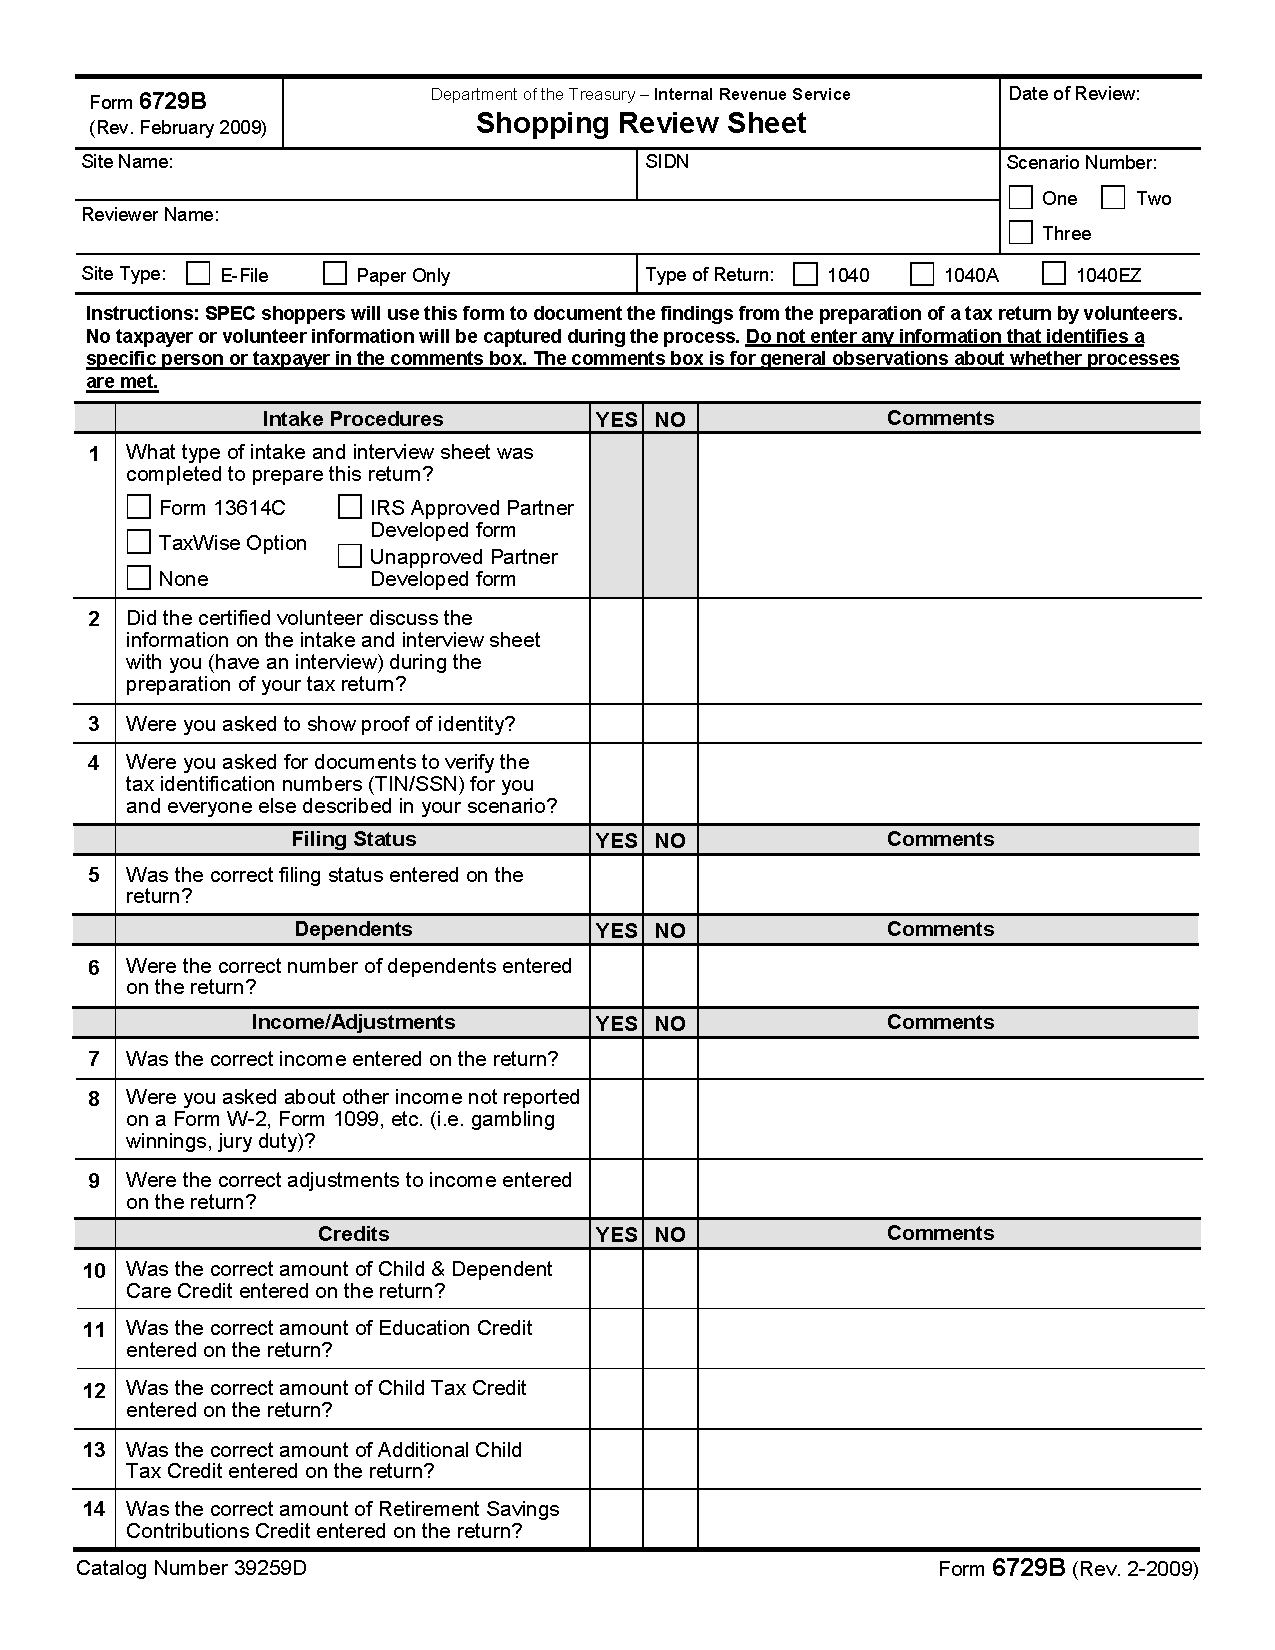 Tax Return Preparation Tax Return Preparation Worksheet Together With Income Tax Preparation Worksheet